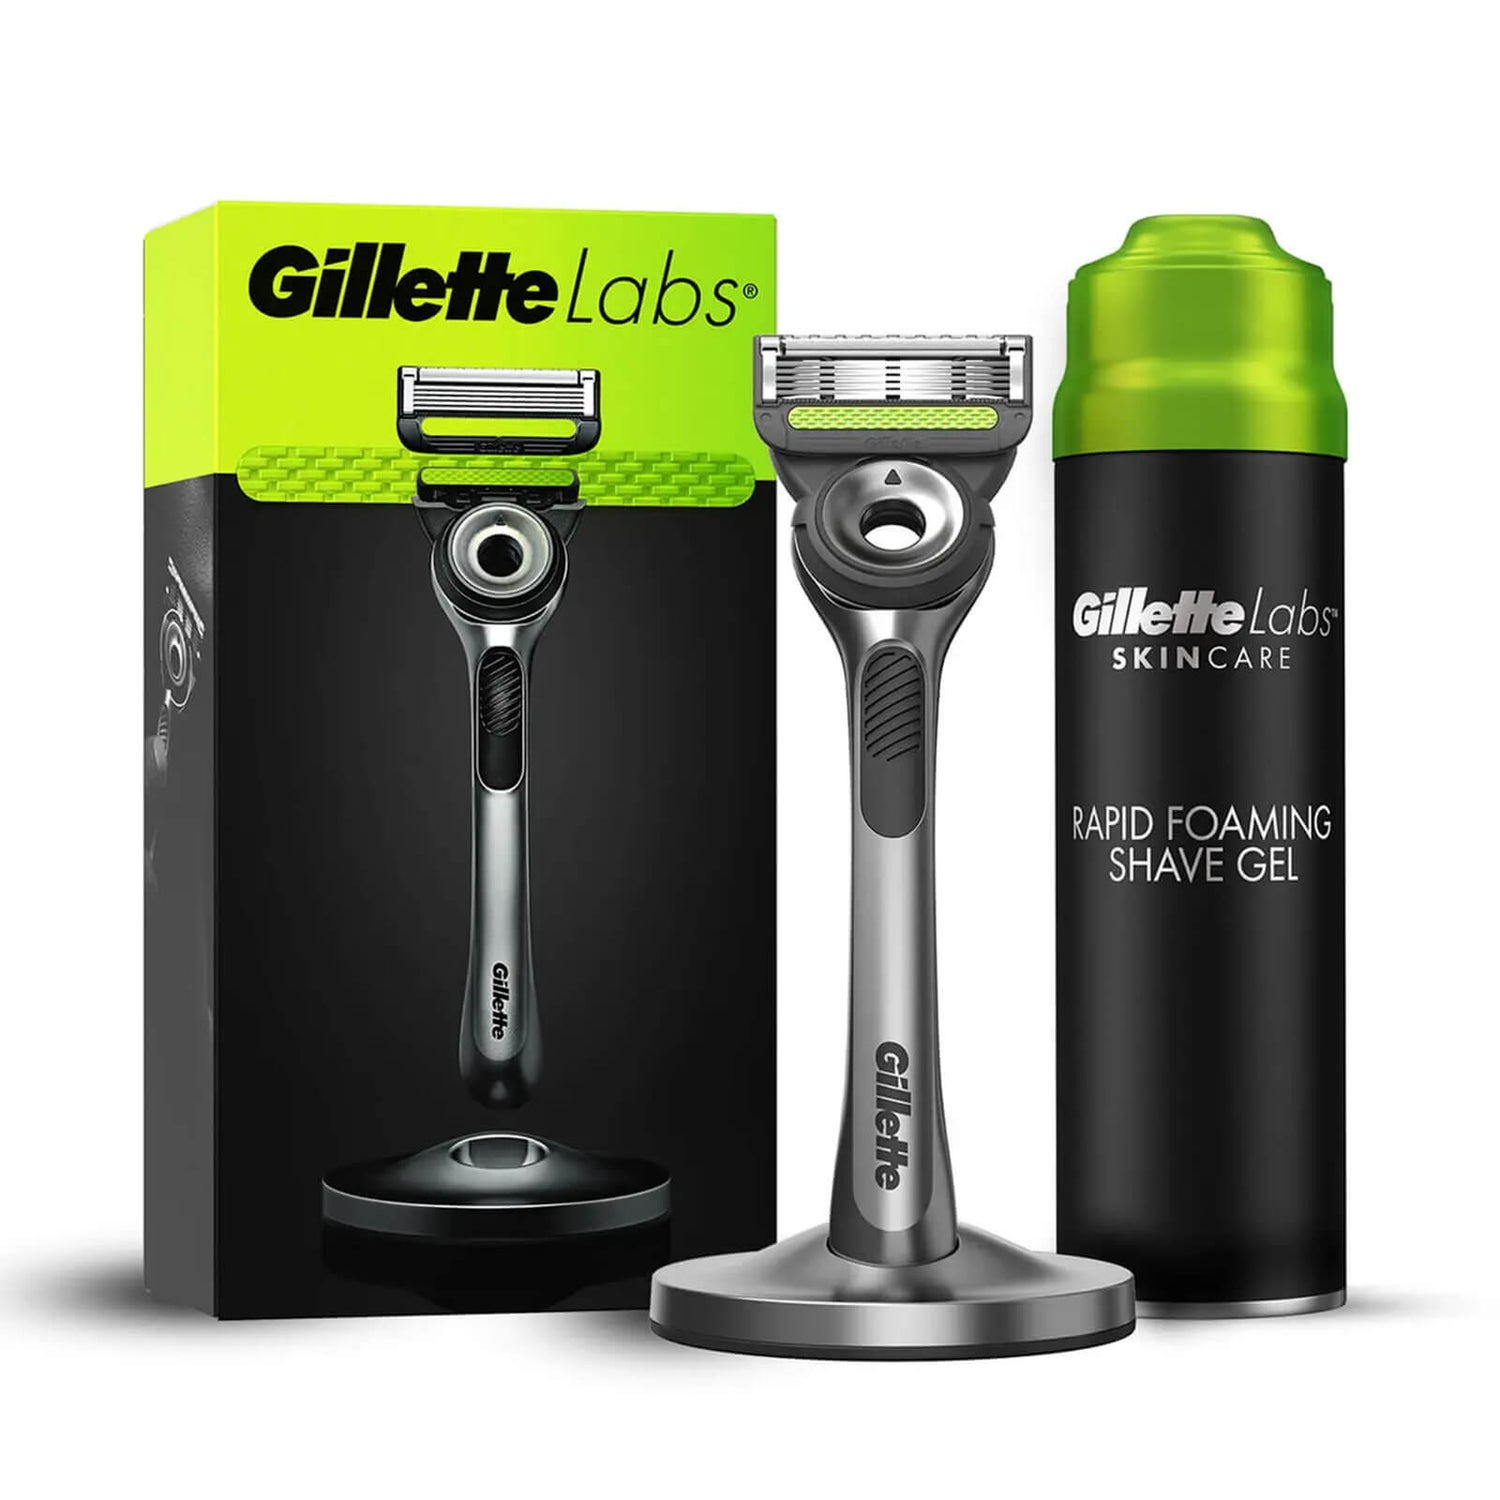 Gillette Labs Razor with Exfoliating Bar, Magnetic Stand, Shaving Foam Bundle